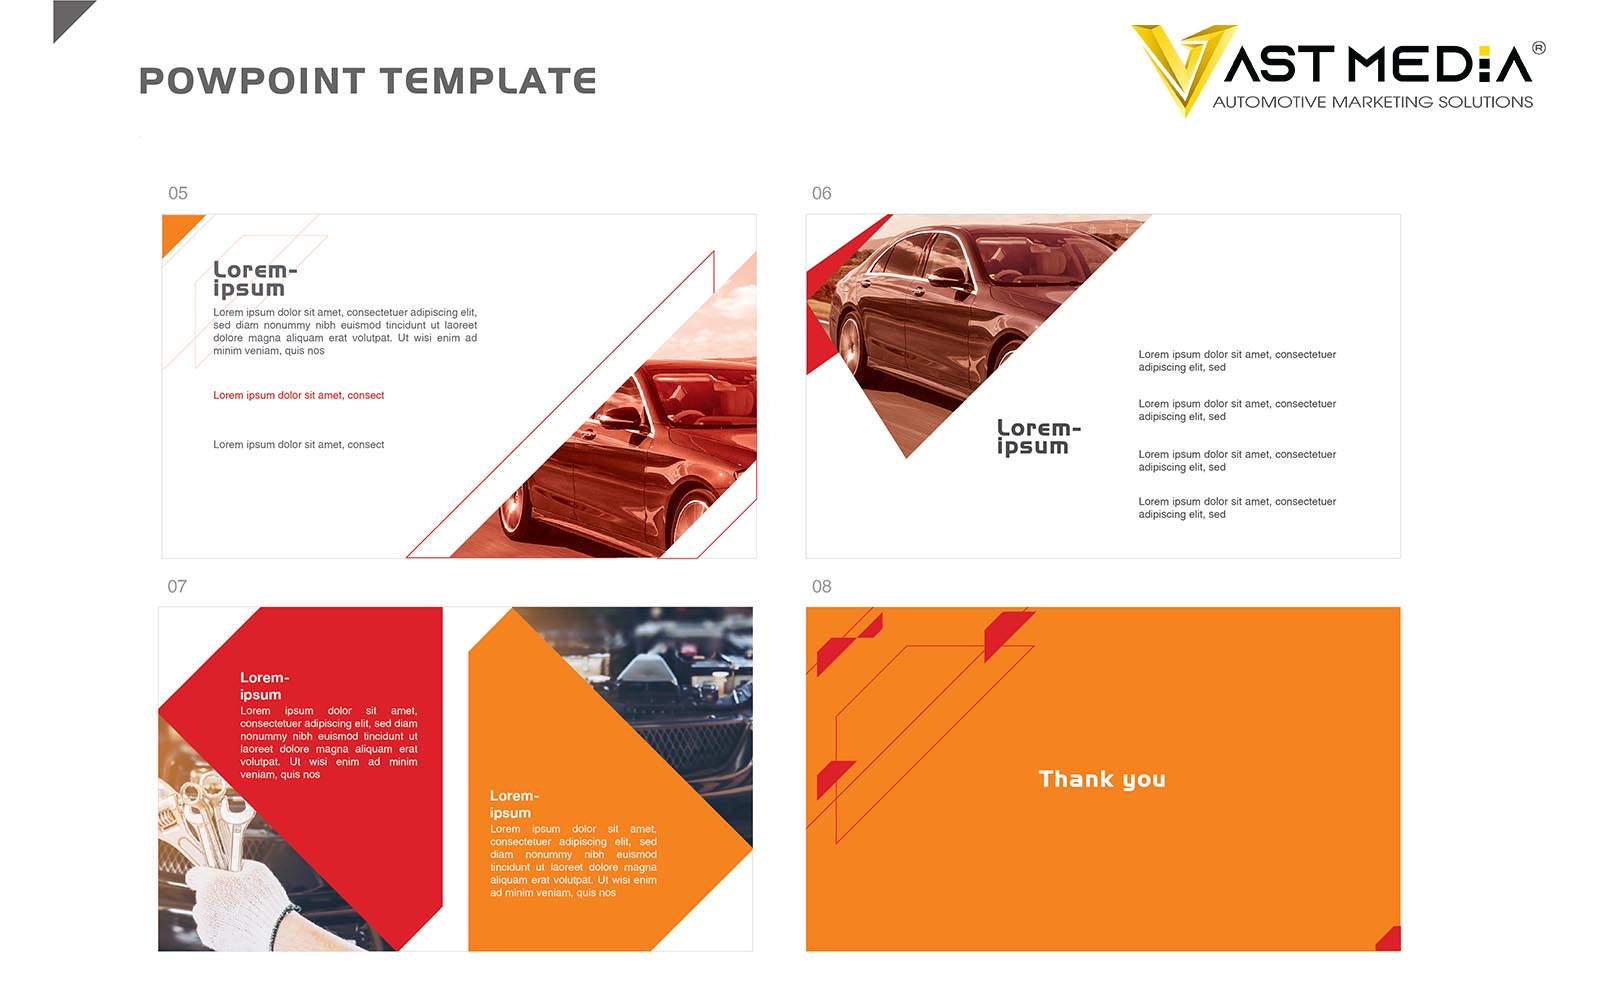 Thiết kế Template Powerpoint OBD Việt Nam